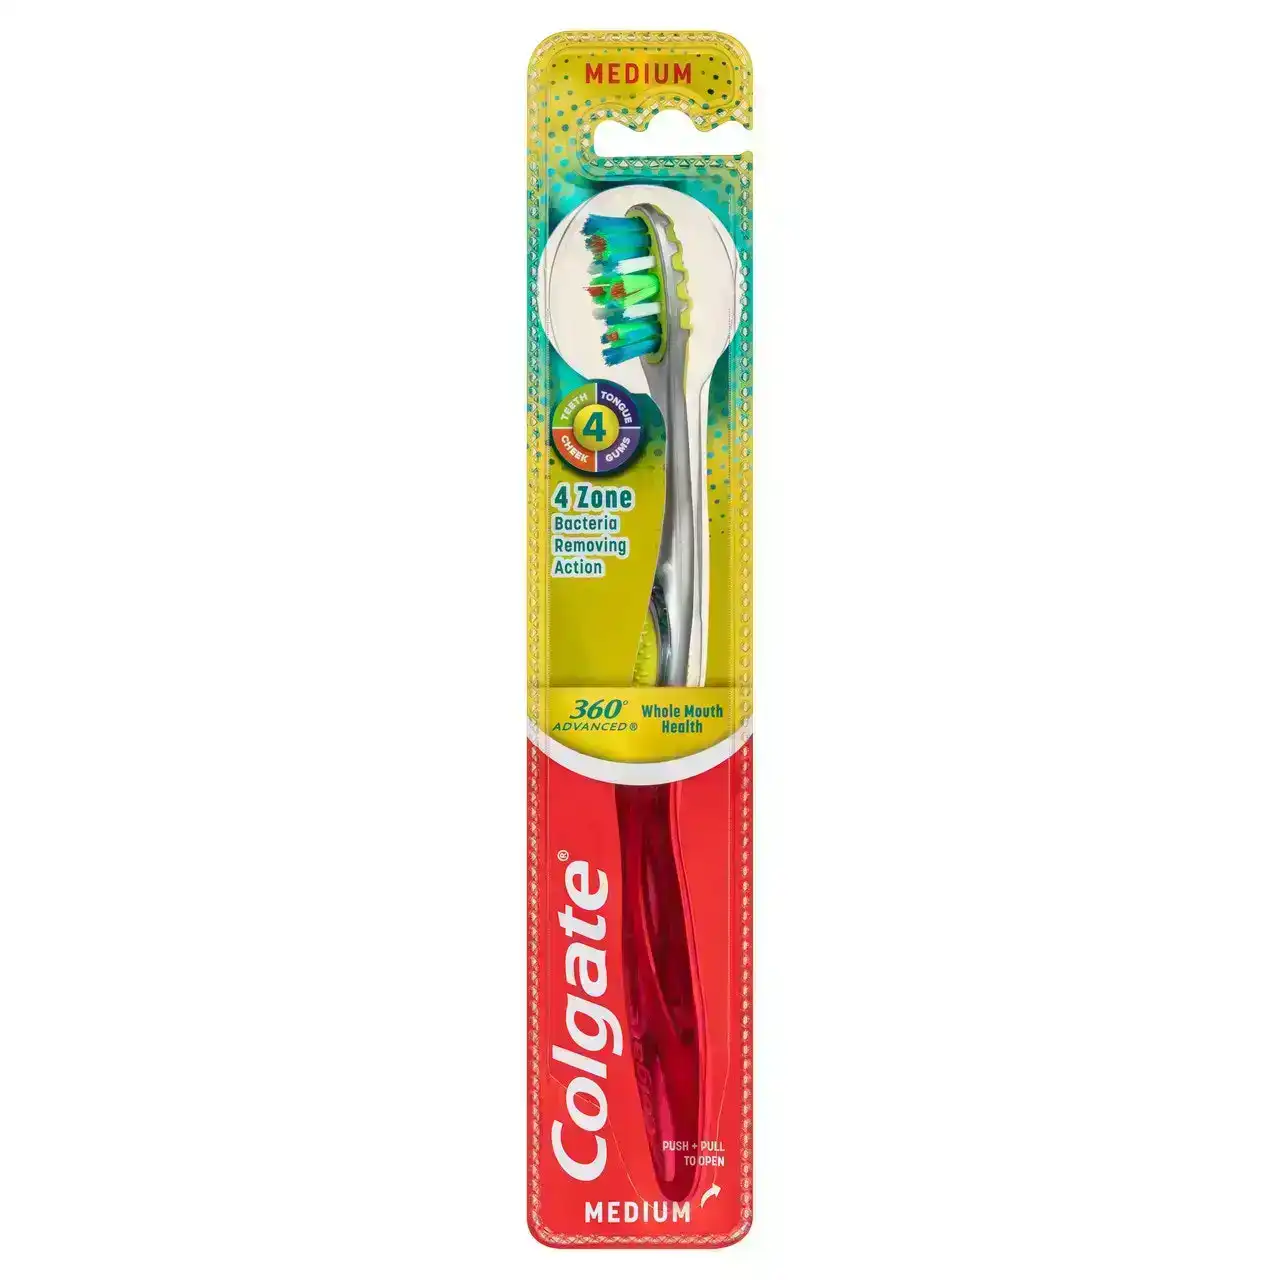 Colgate 360o Advanced Whole Mouth Health Manual Toothbrush, 1 Pack, Medium Bristles with 4 Zone Bacteria Removing Action